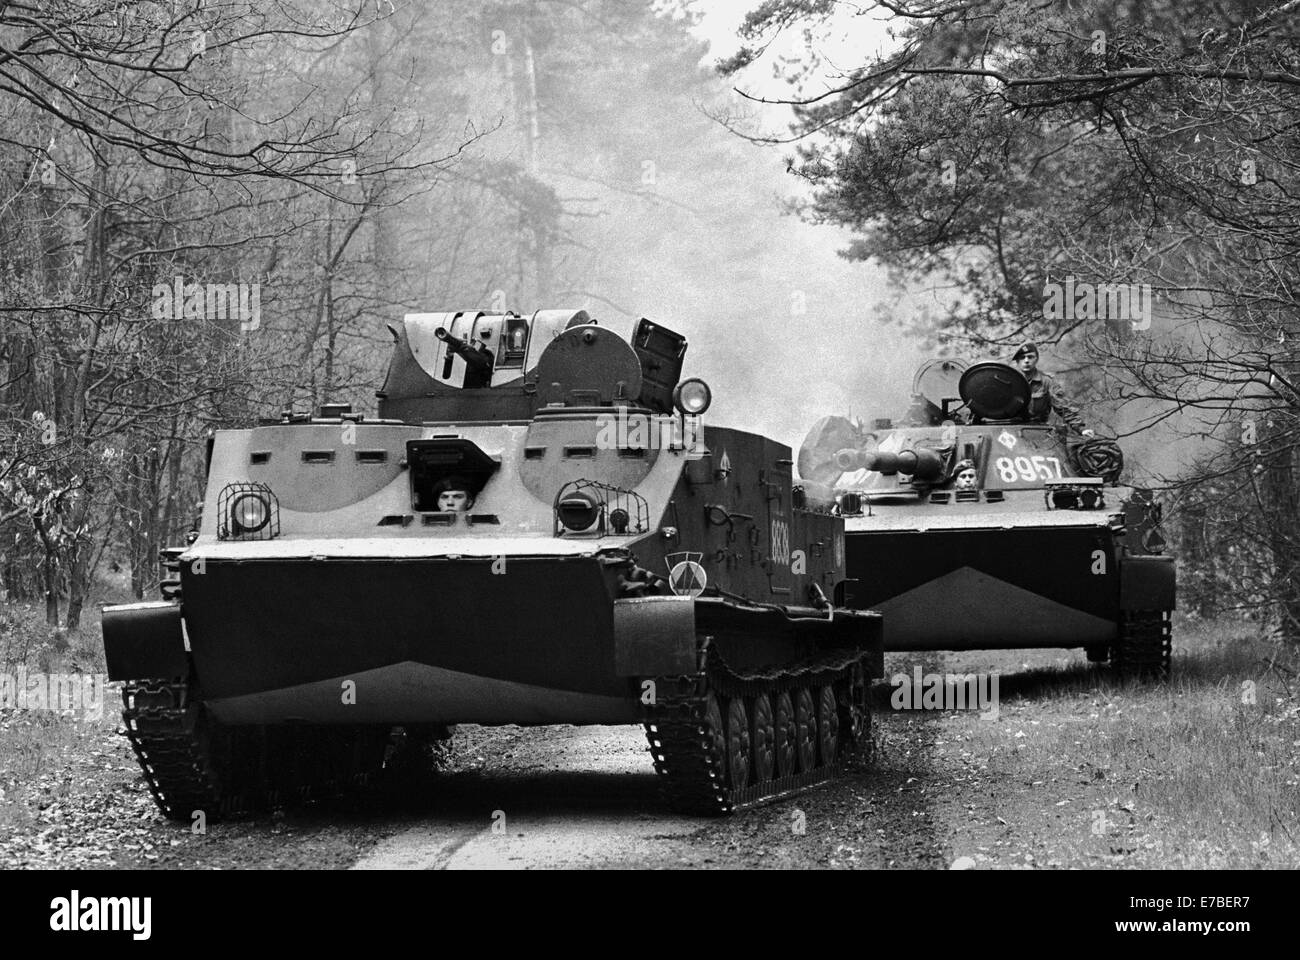 Polish army, amphibious infantry division of Lebork, armored vehicles OT-62 and PT-76 (May 1991) Stock Photo